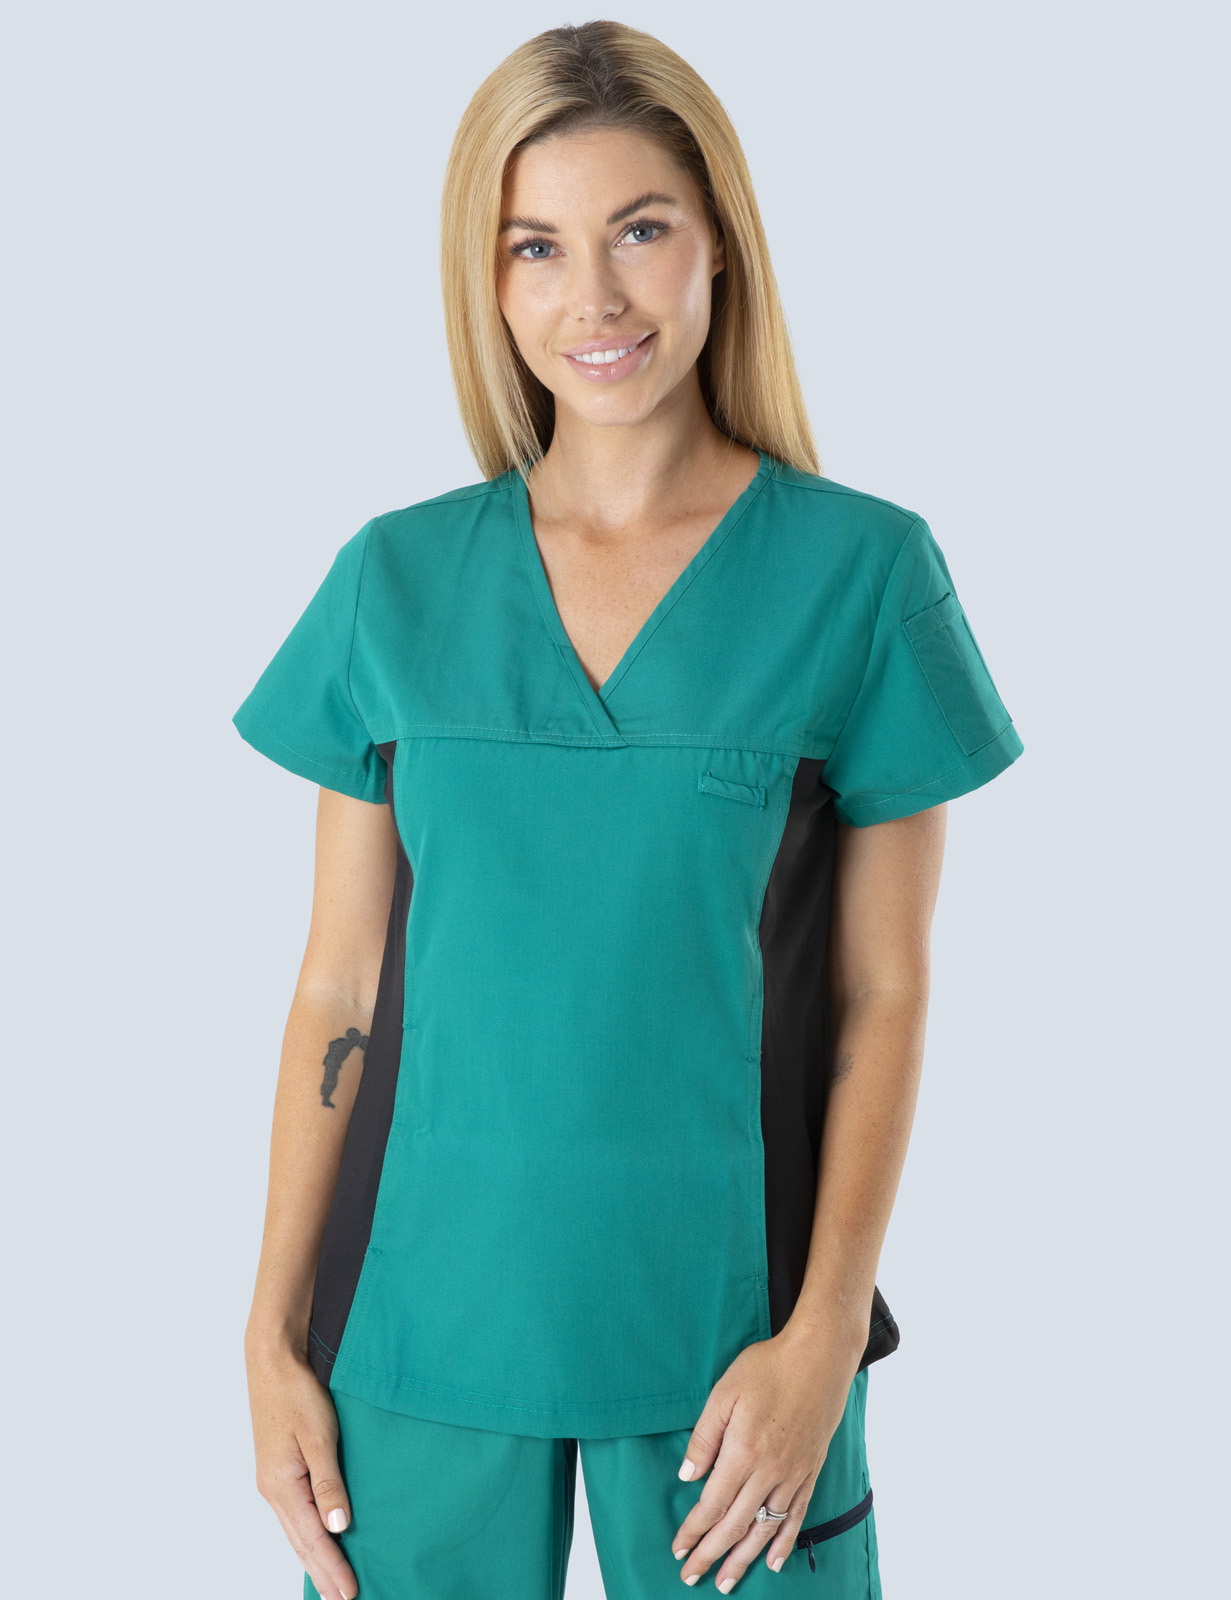 Women's Fit Solid Scrub Top With Spandex Panel - Hunter - X Large